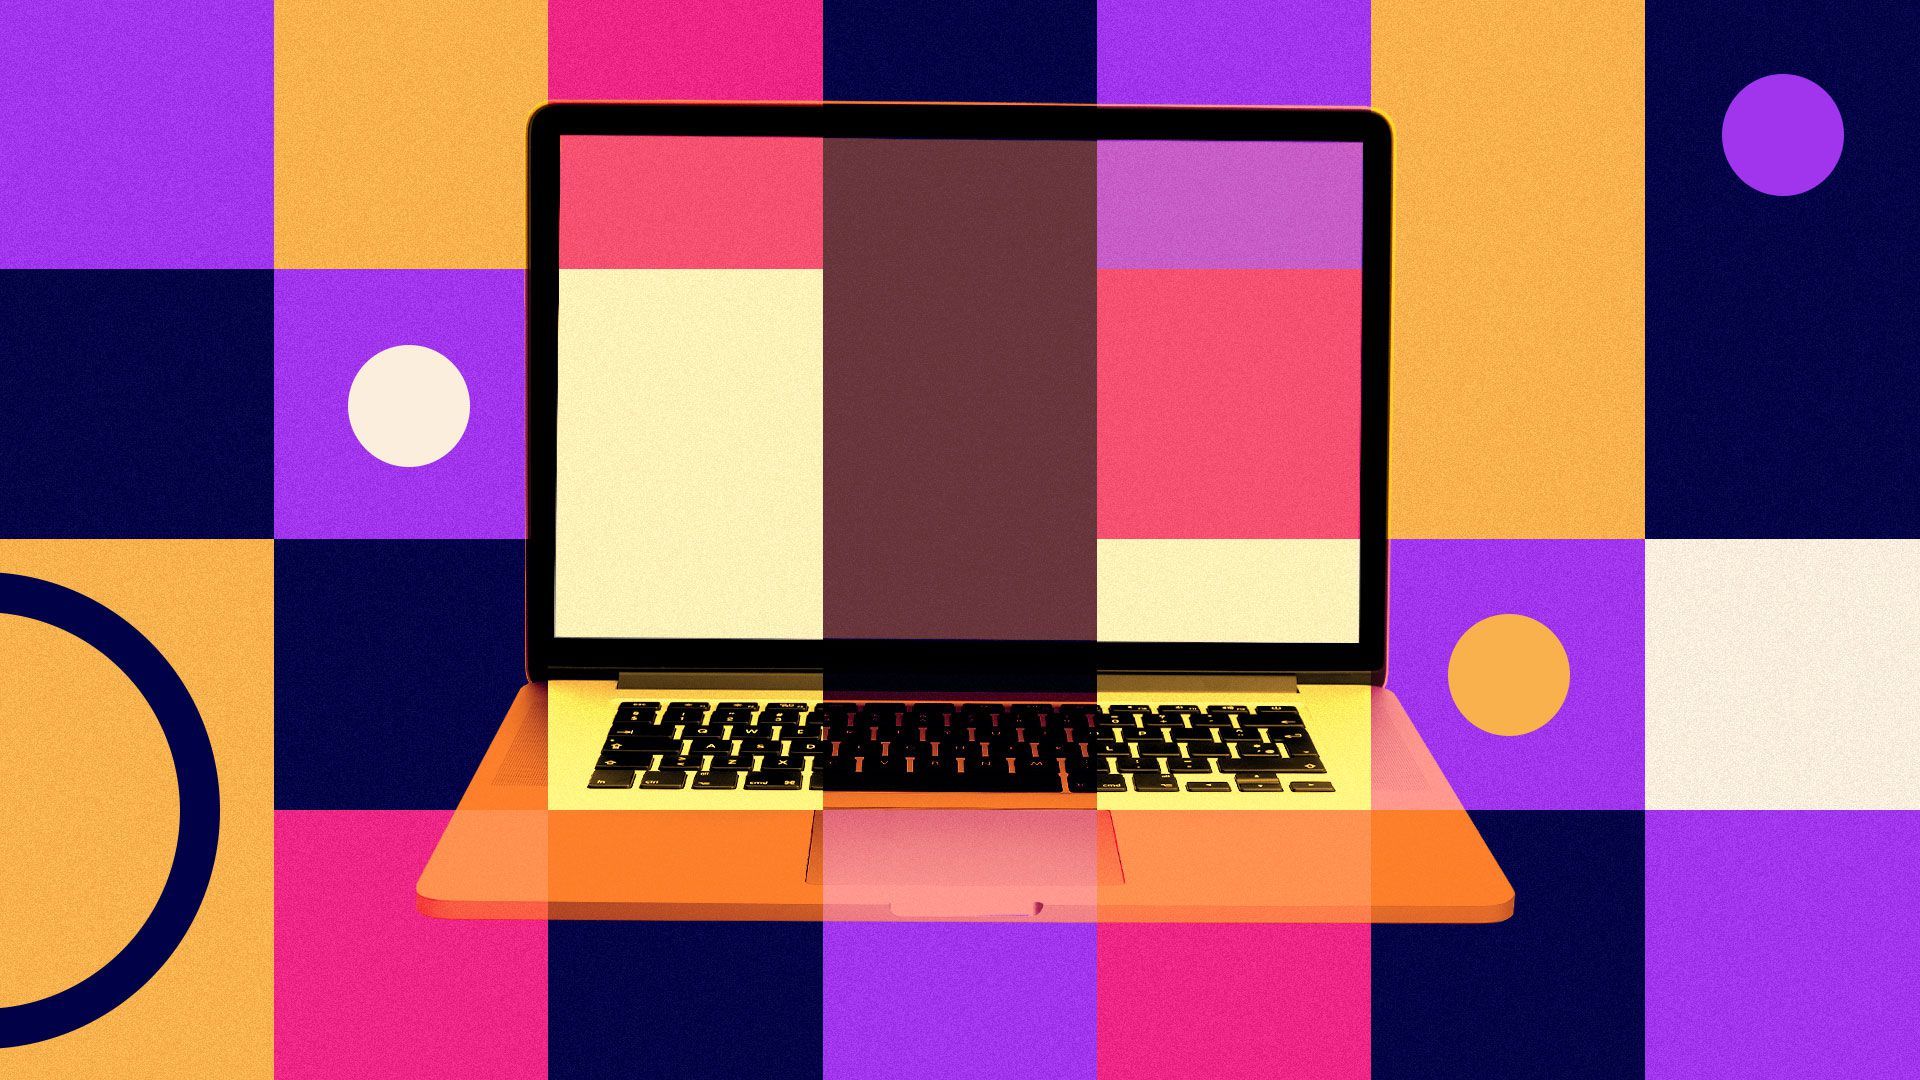 Illustration of open laptop with a grid background and circles